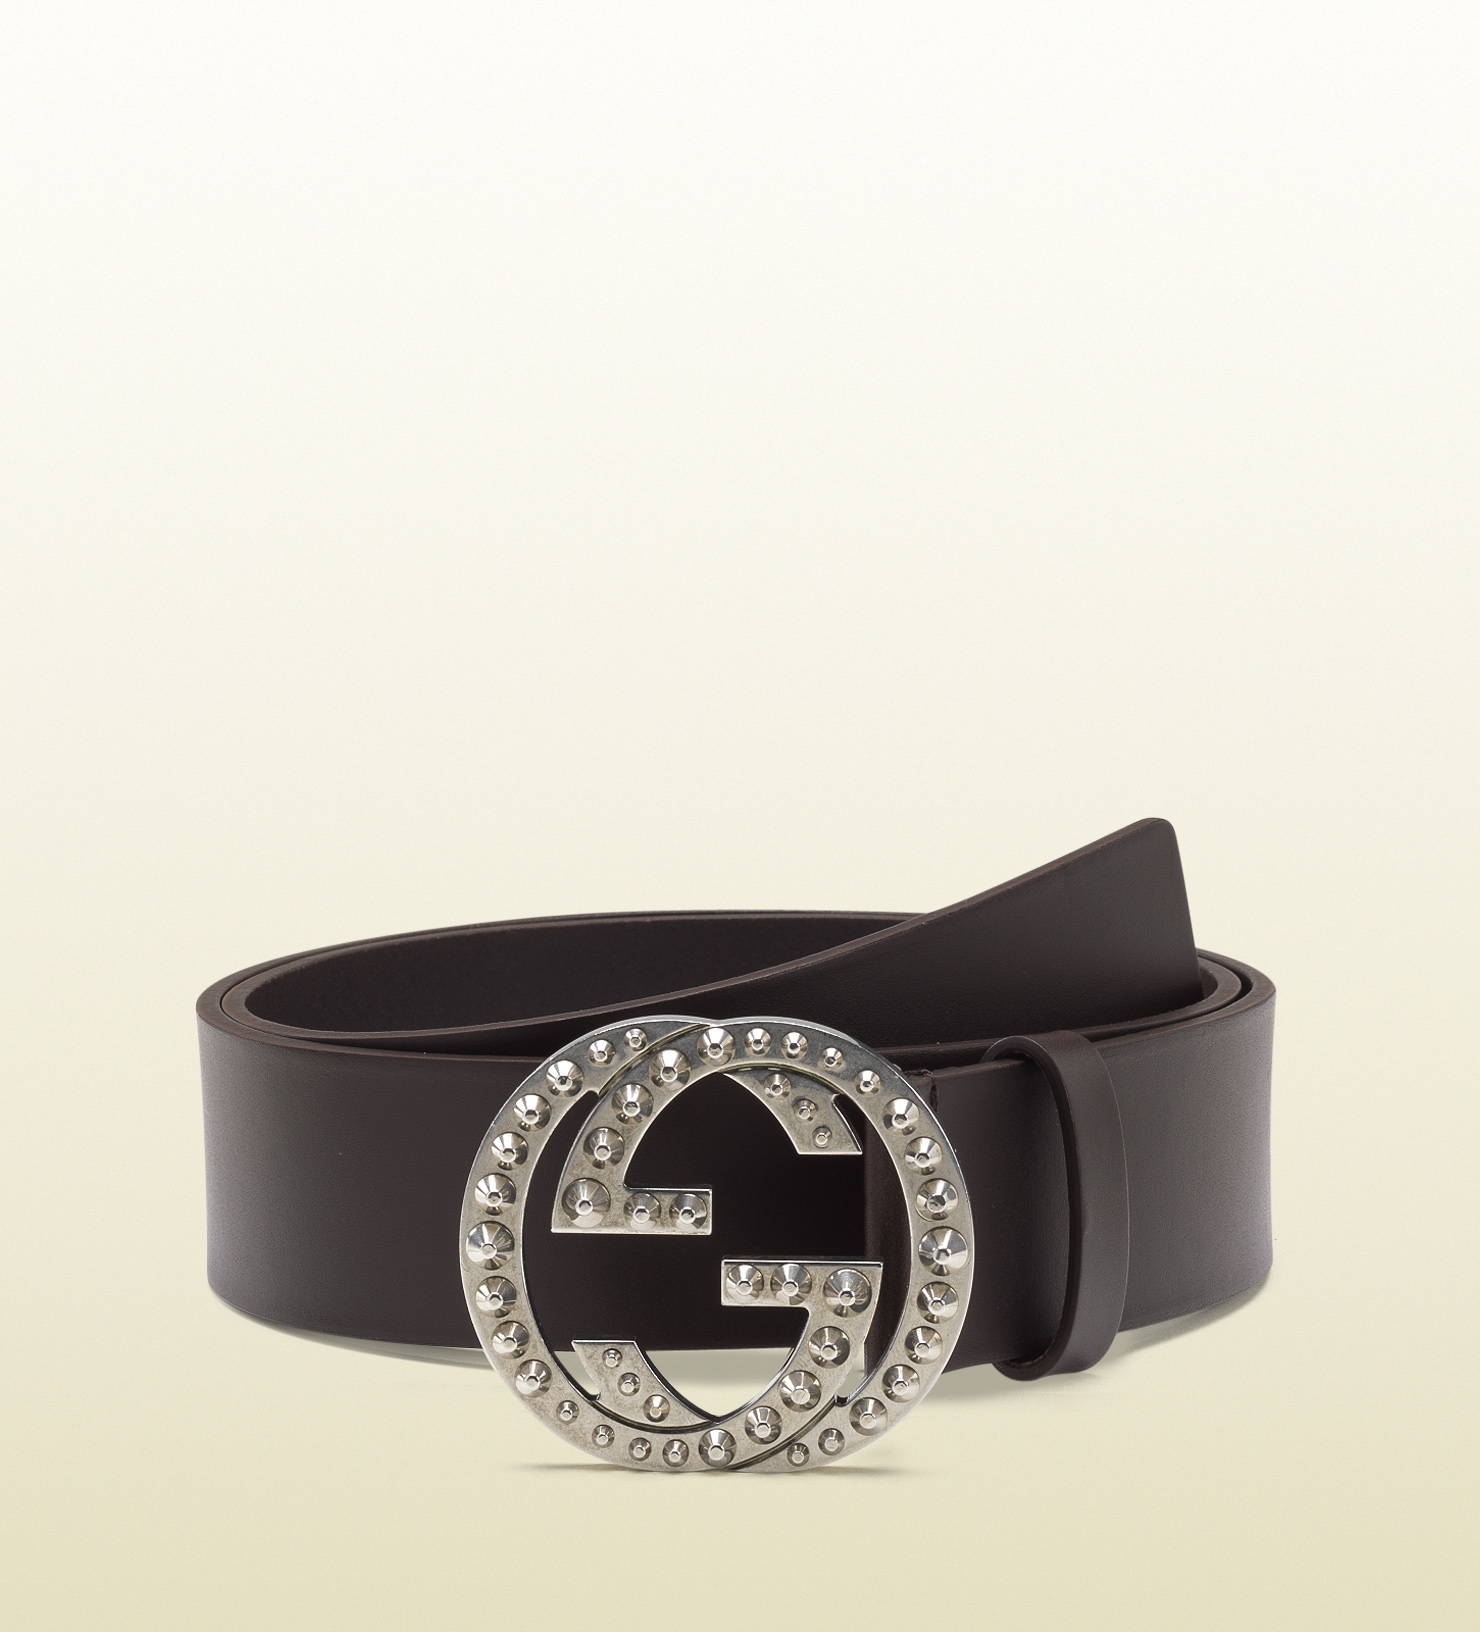 Lyst - Gucci Brown Leather Belt with Studded Interlocking G Buckle in Brown for Men